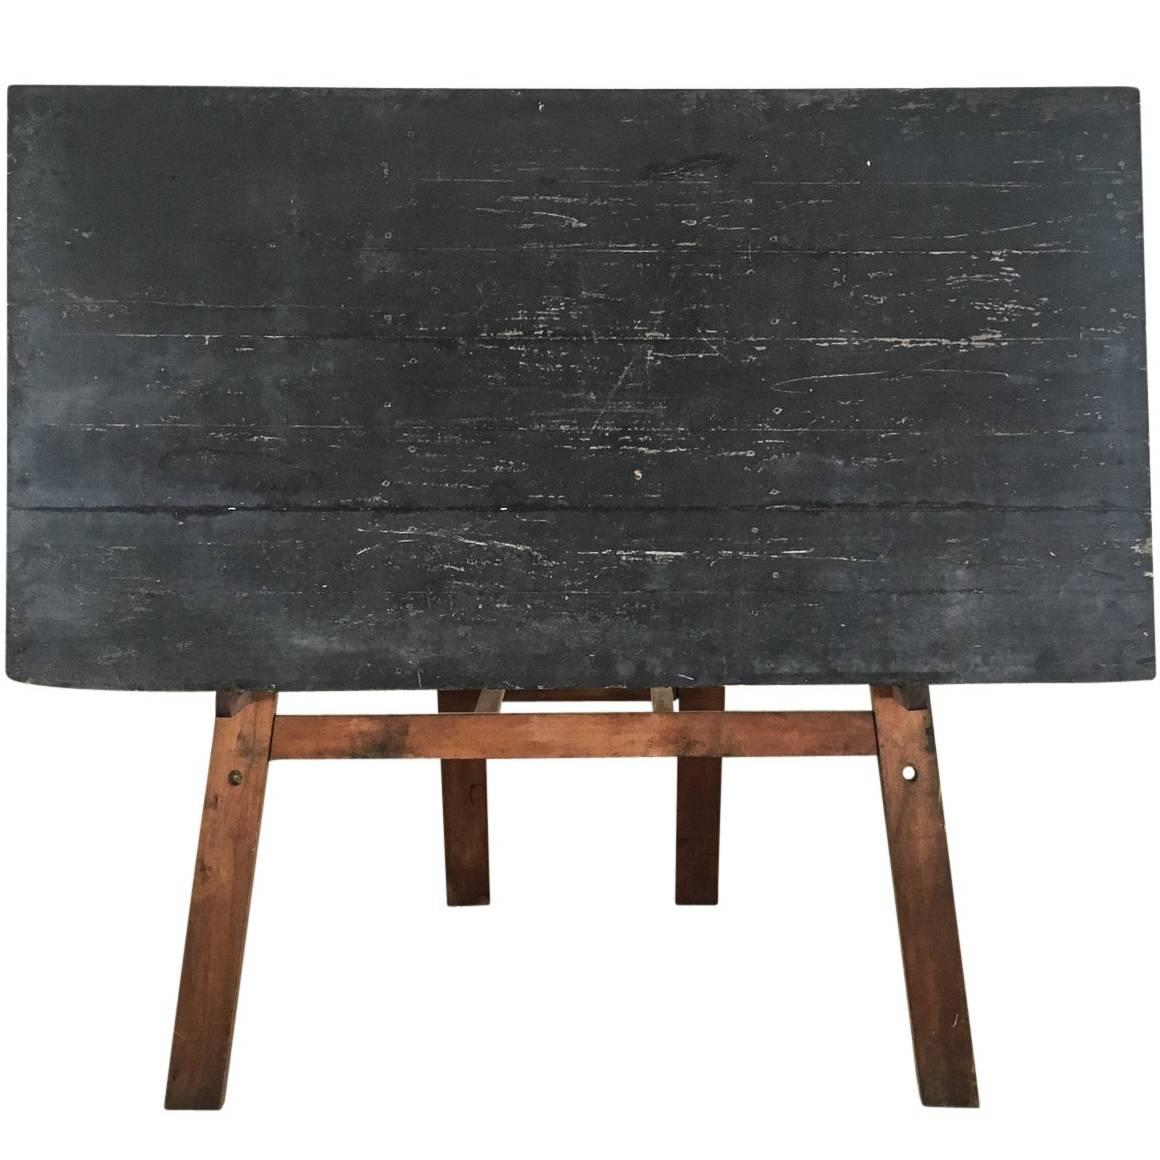 Large Primitive French Chalkboard on Stand